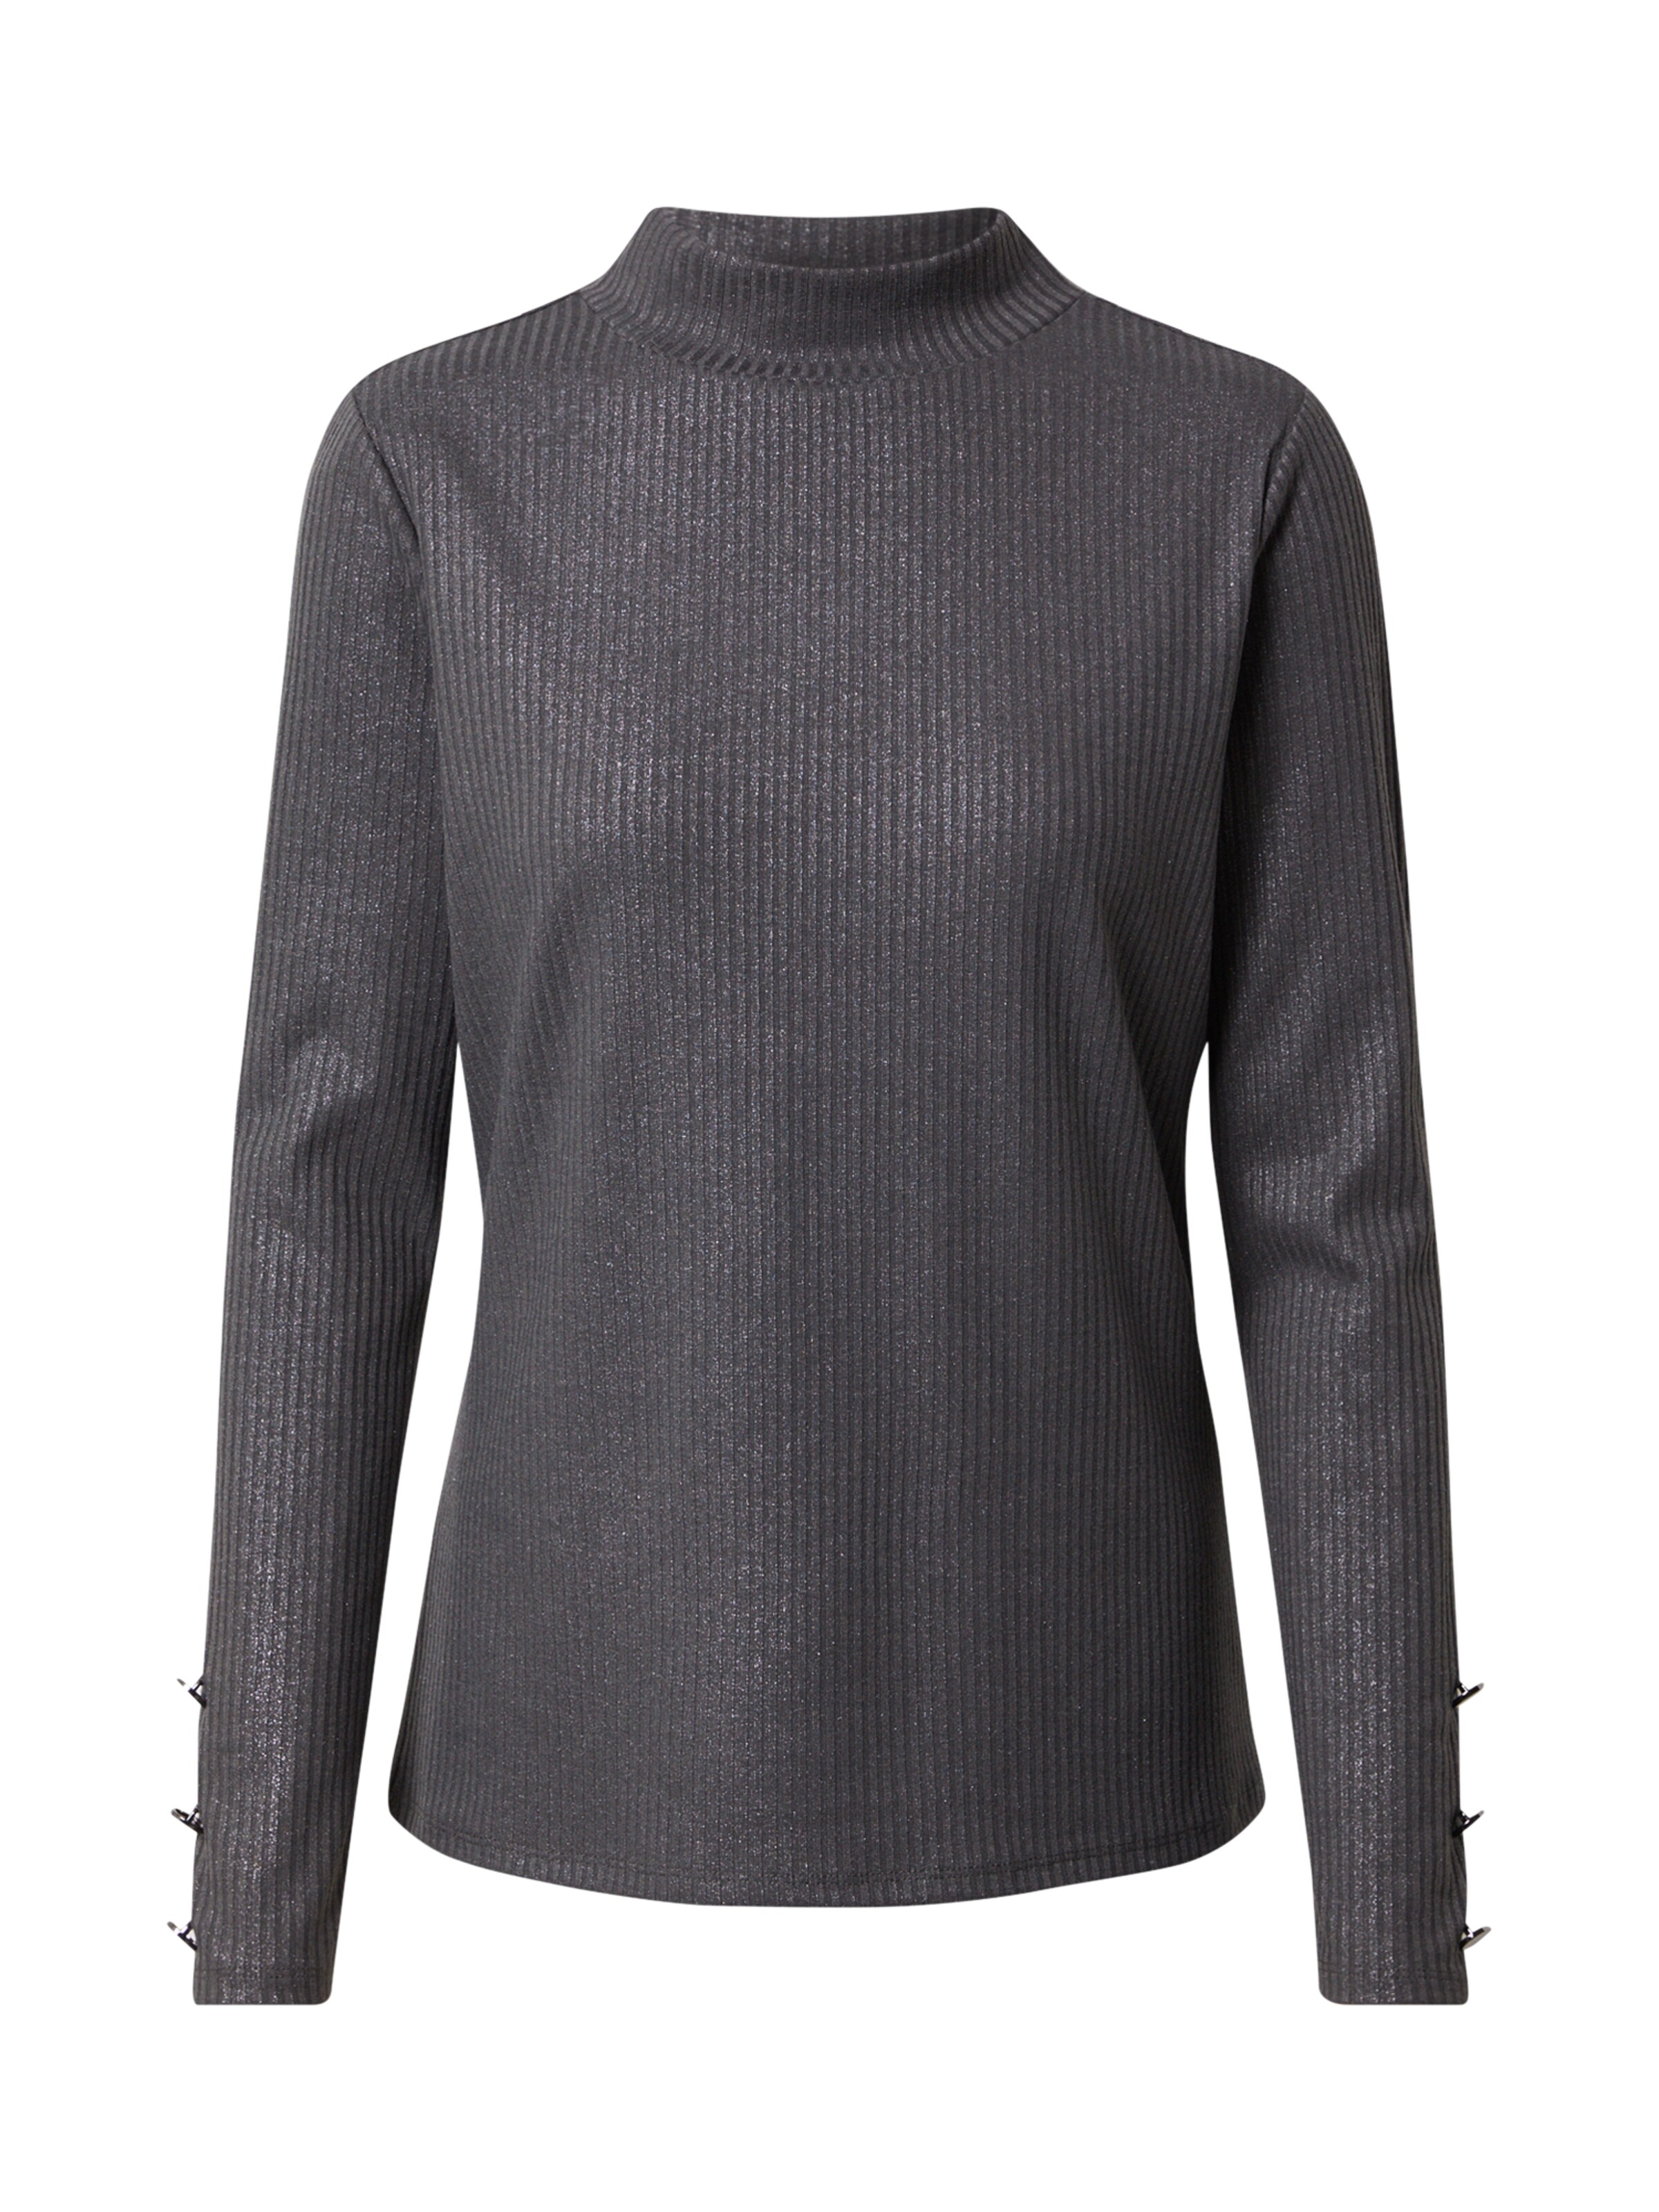 Frauen Shirts & Tops COMMA Pullover in Dunkelgrau - YT49702